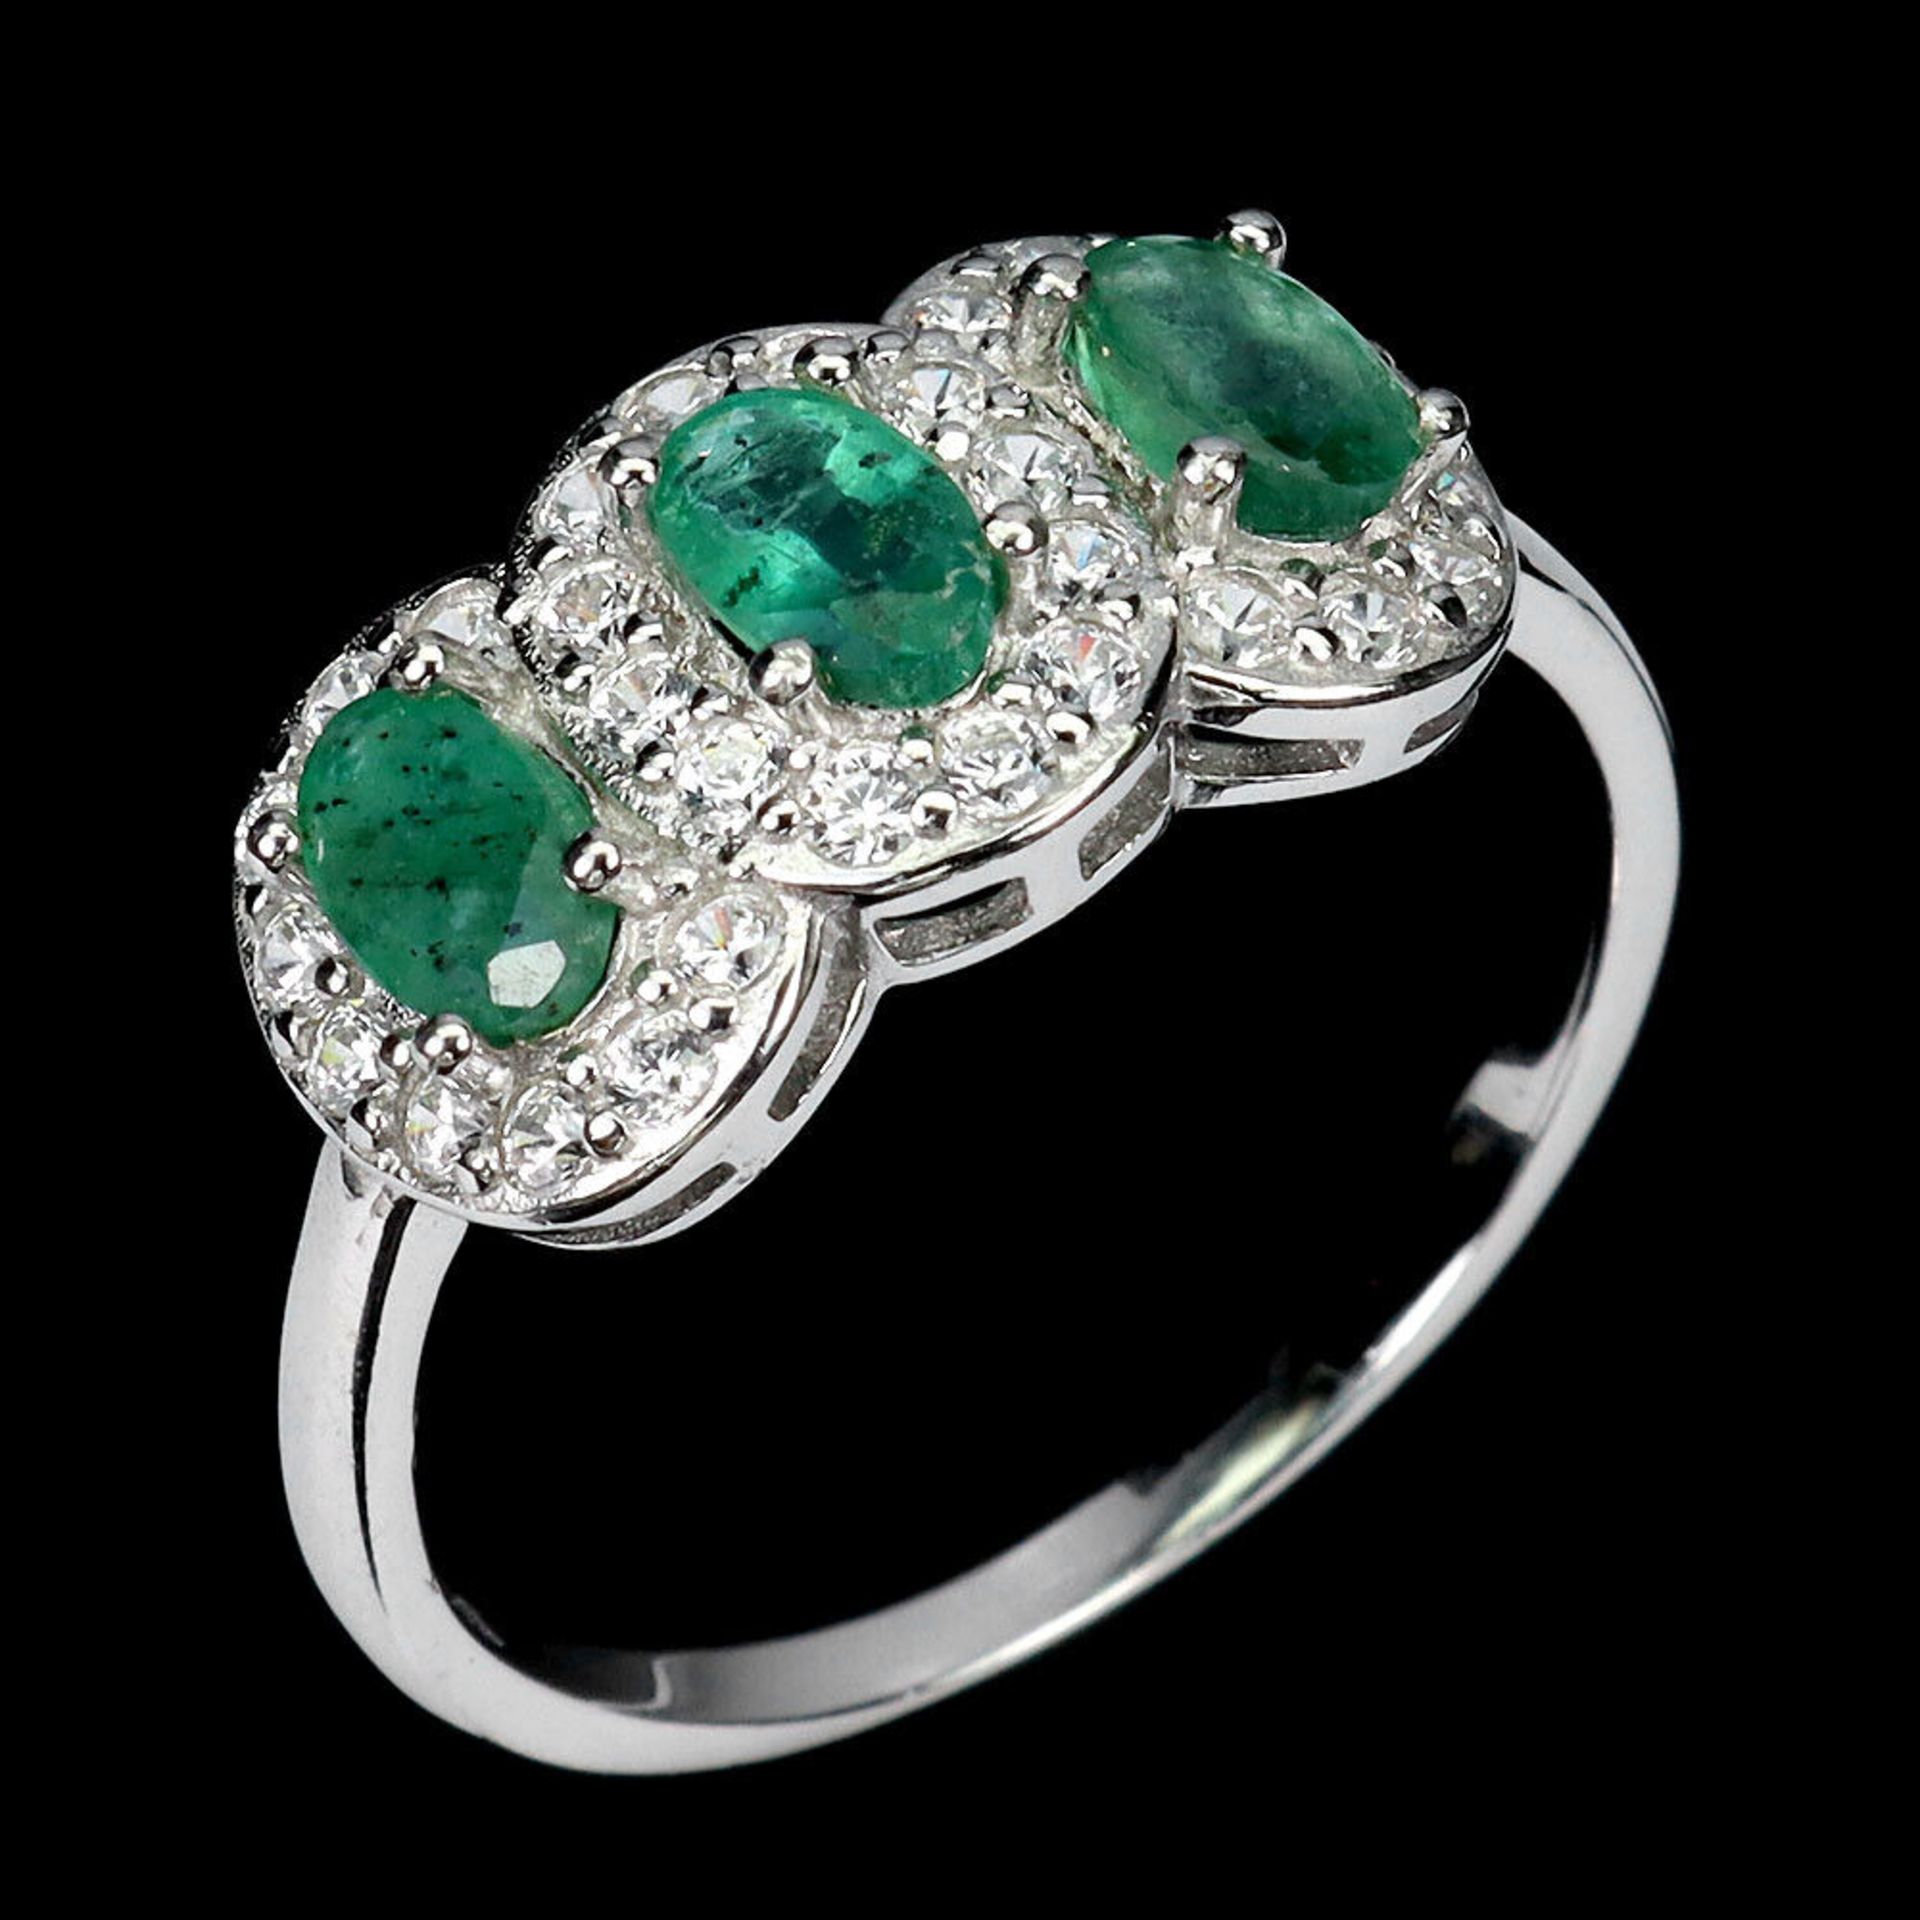 A 925 silver triple cluster ring set with oval cut emeralds and white stones, ring size N.5. - Image 2 of 3